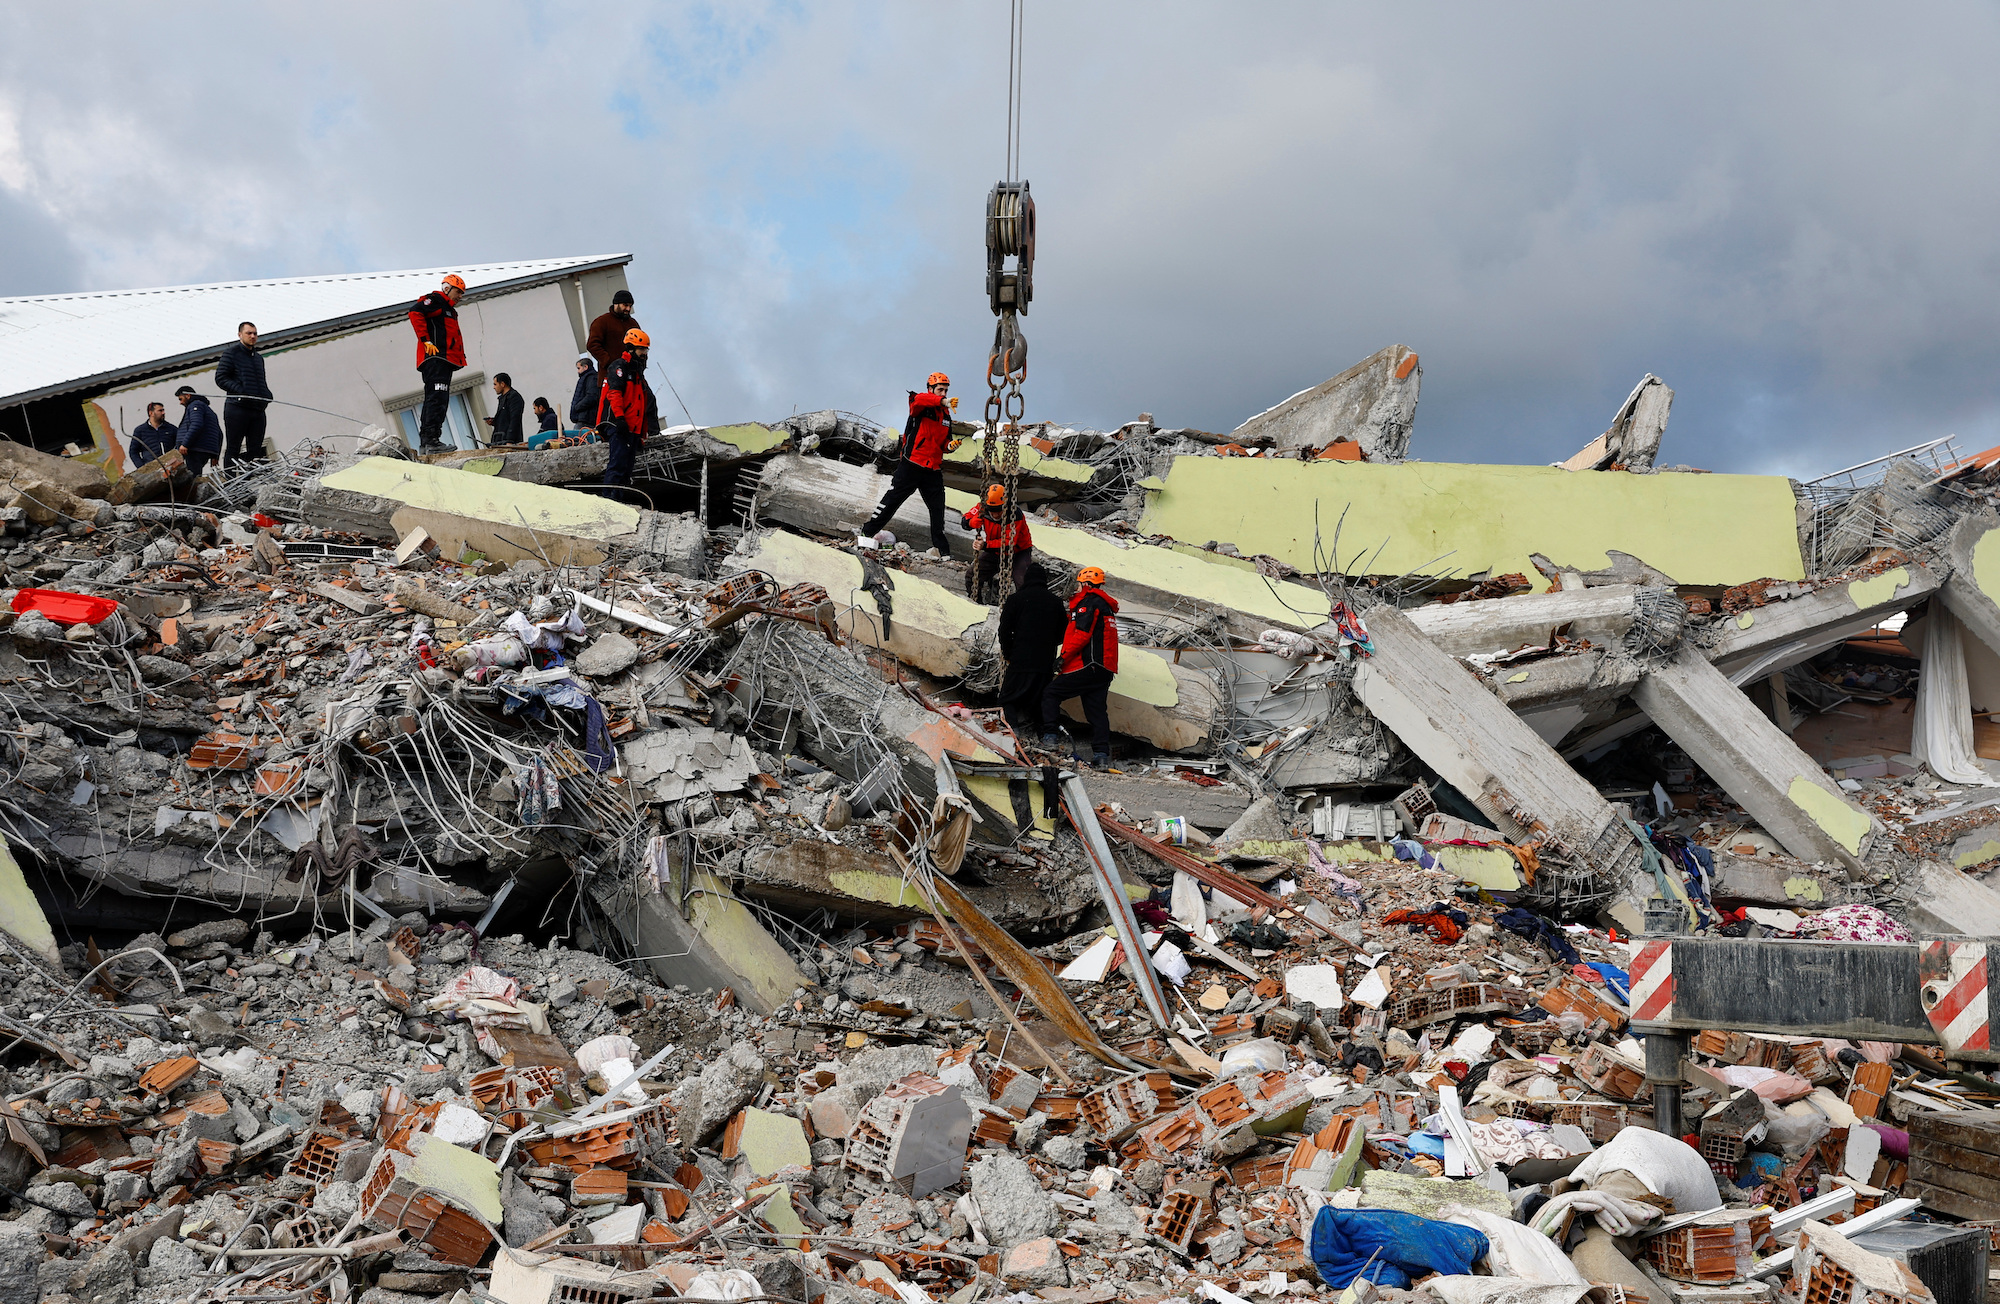 Rescuers search for survivors at the site of a collapsed building in Gaziantep, Turkey, on Tuesday.